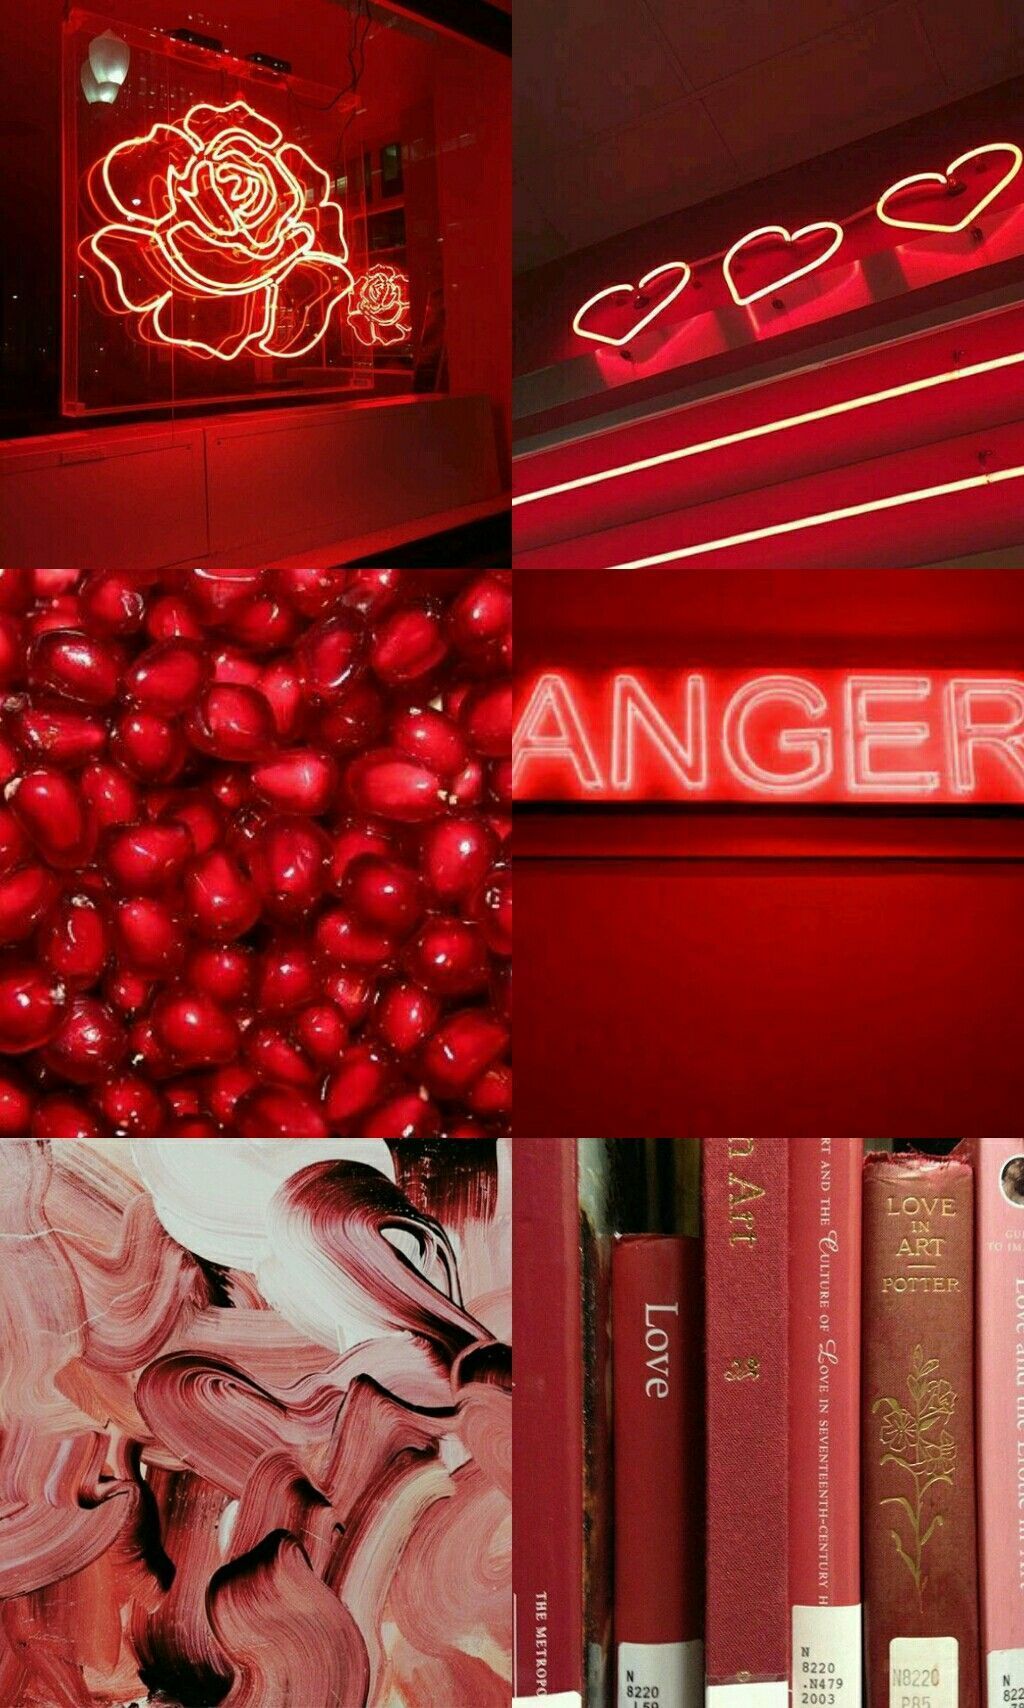 Aesthetic red background with books and red neon lights - Vintage, iPhone red